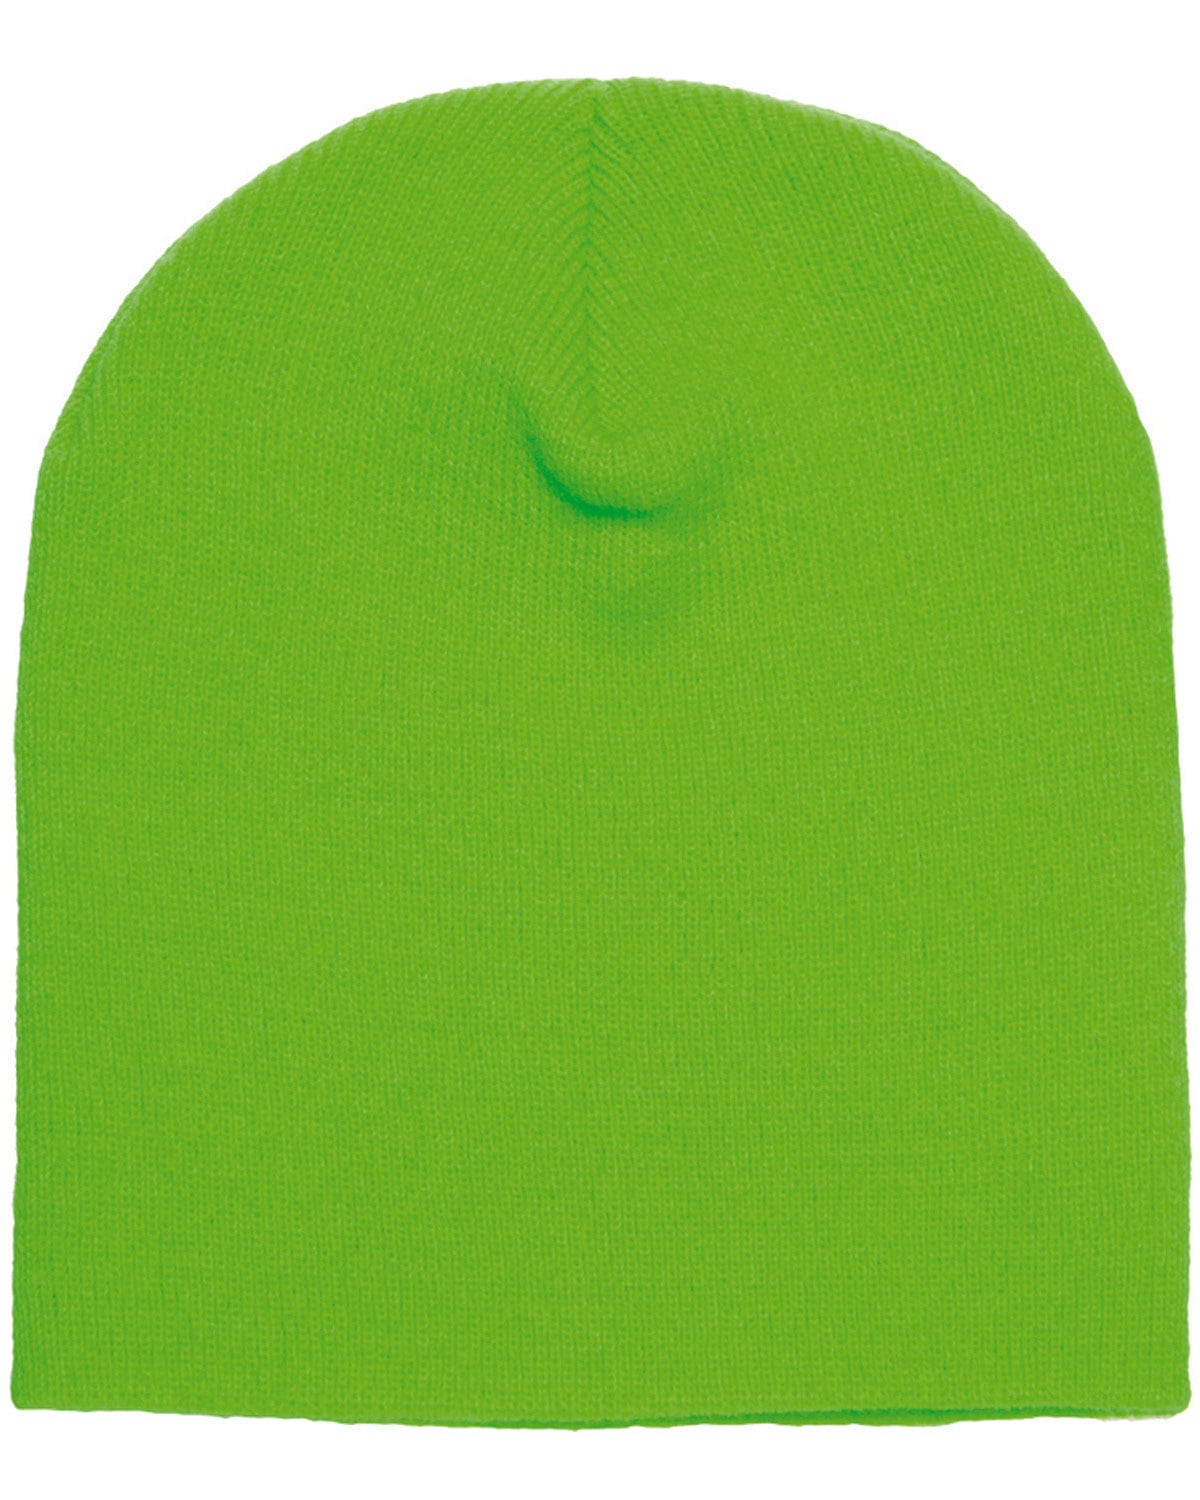 Yupoong 1500: Adult Knit Beanie